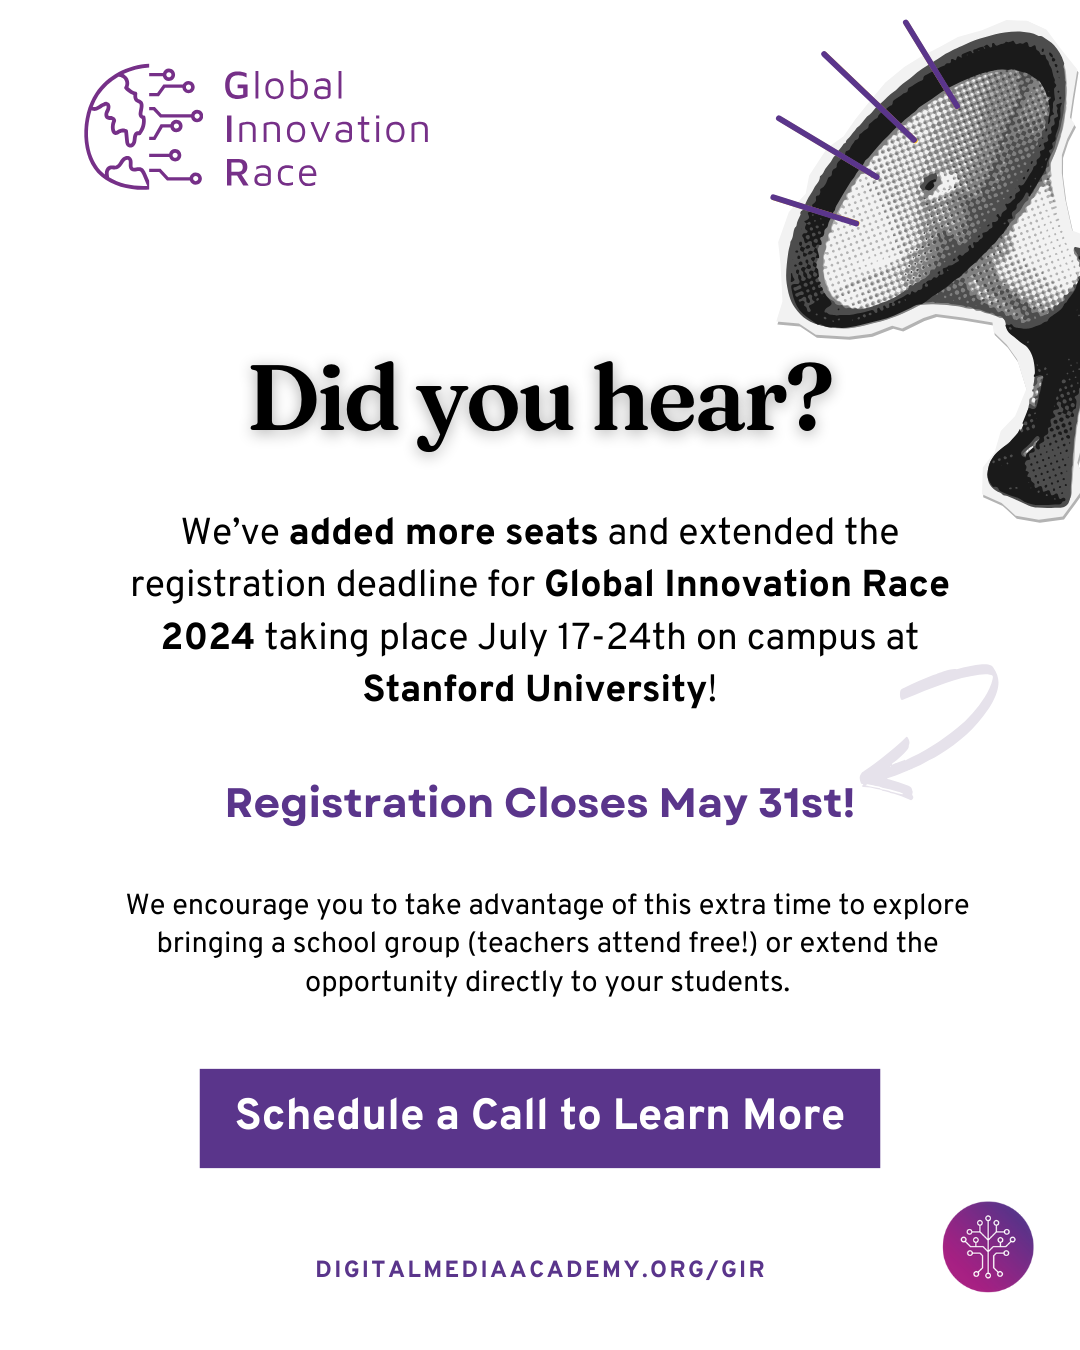 We're excited to announce more seats added for Global Innovation Race (GIR) at Stanford University!